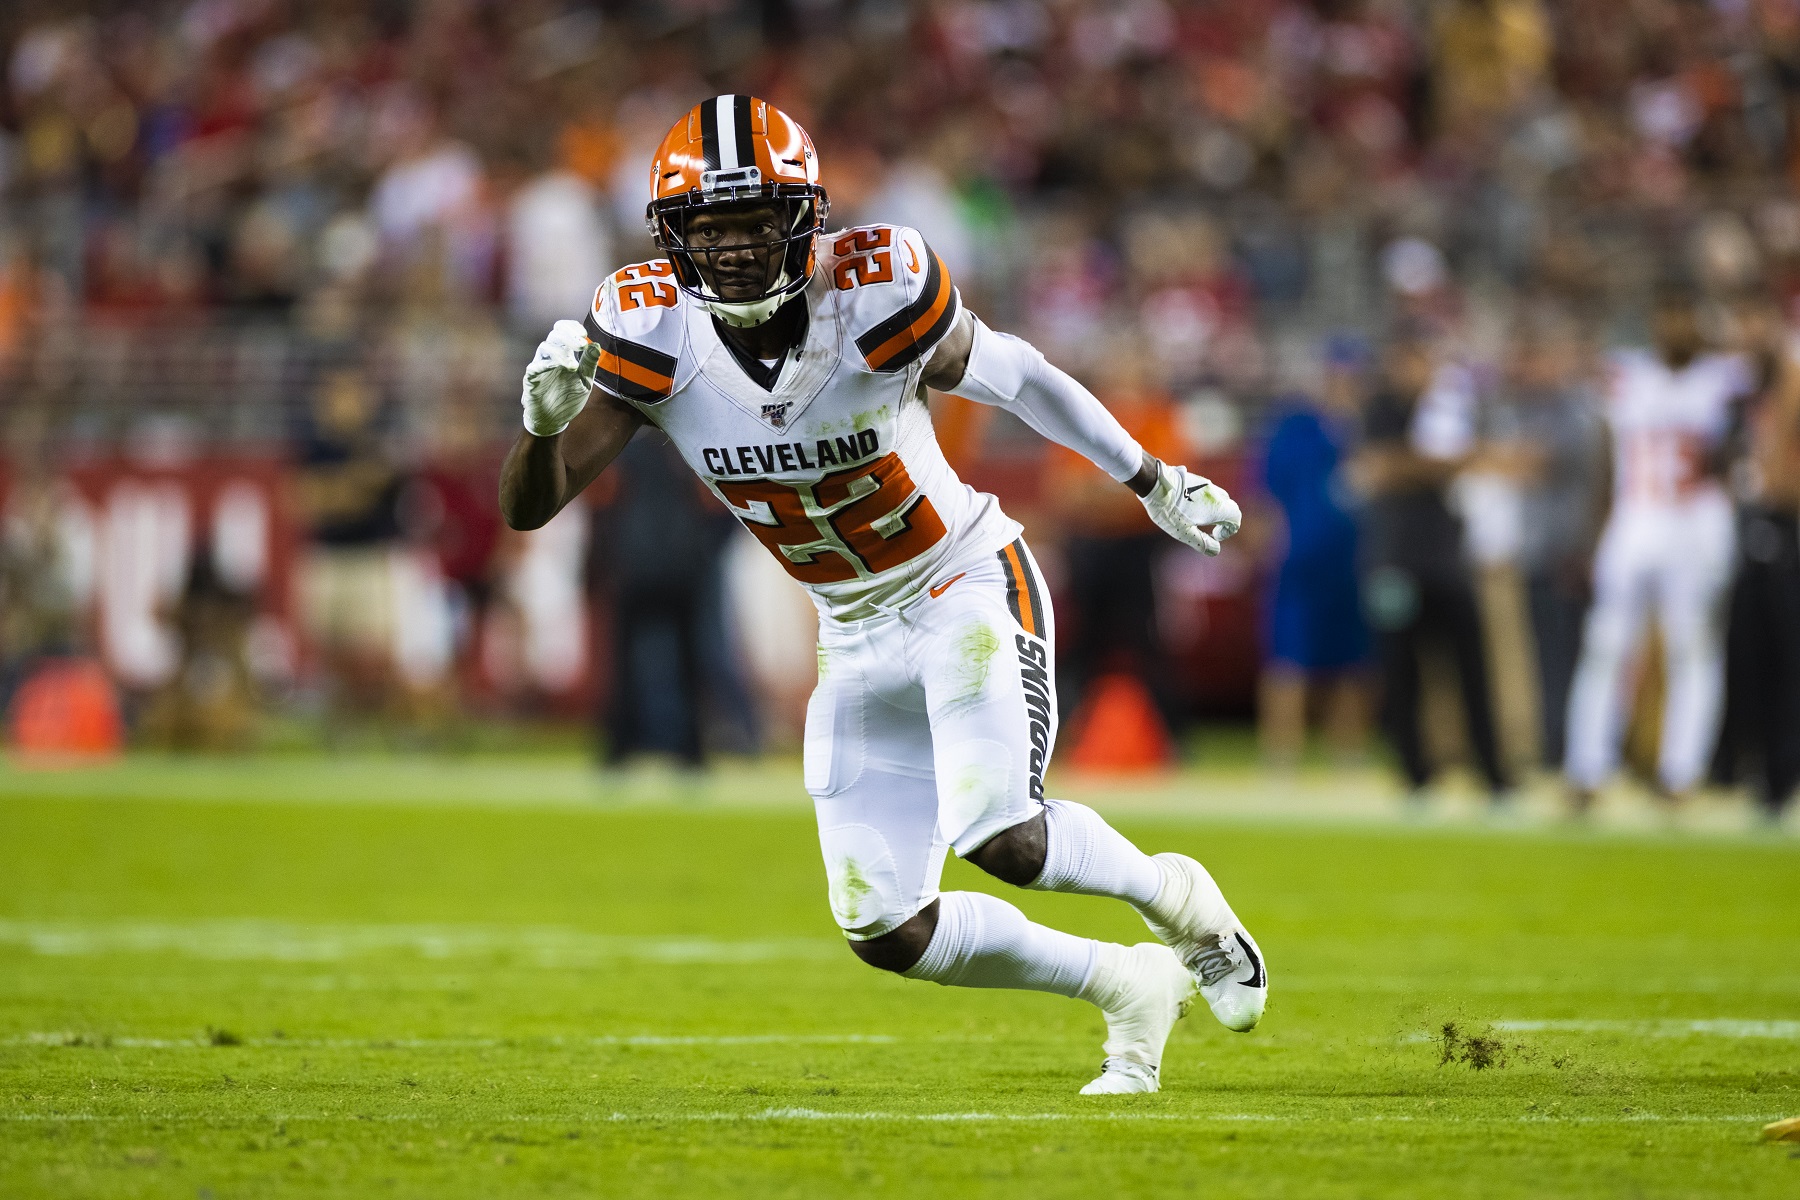 Eric Murray's 2019 season with the Cleveland Browns ended with a knee injury. | Ric Tapia/Icon Sportswire via Getty Images